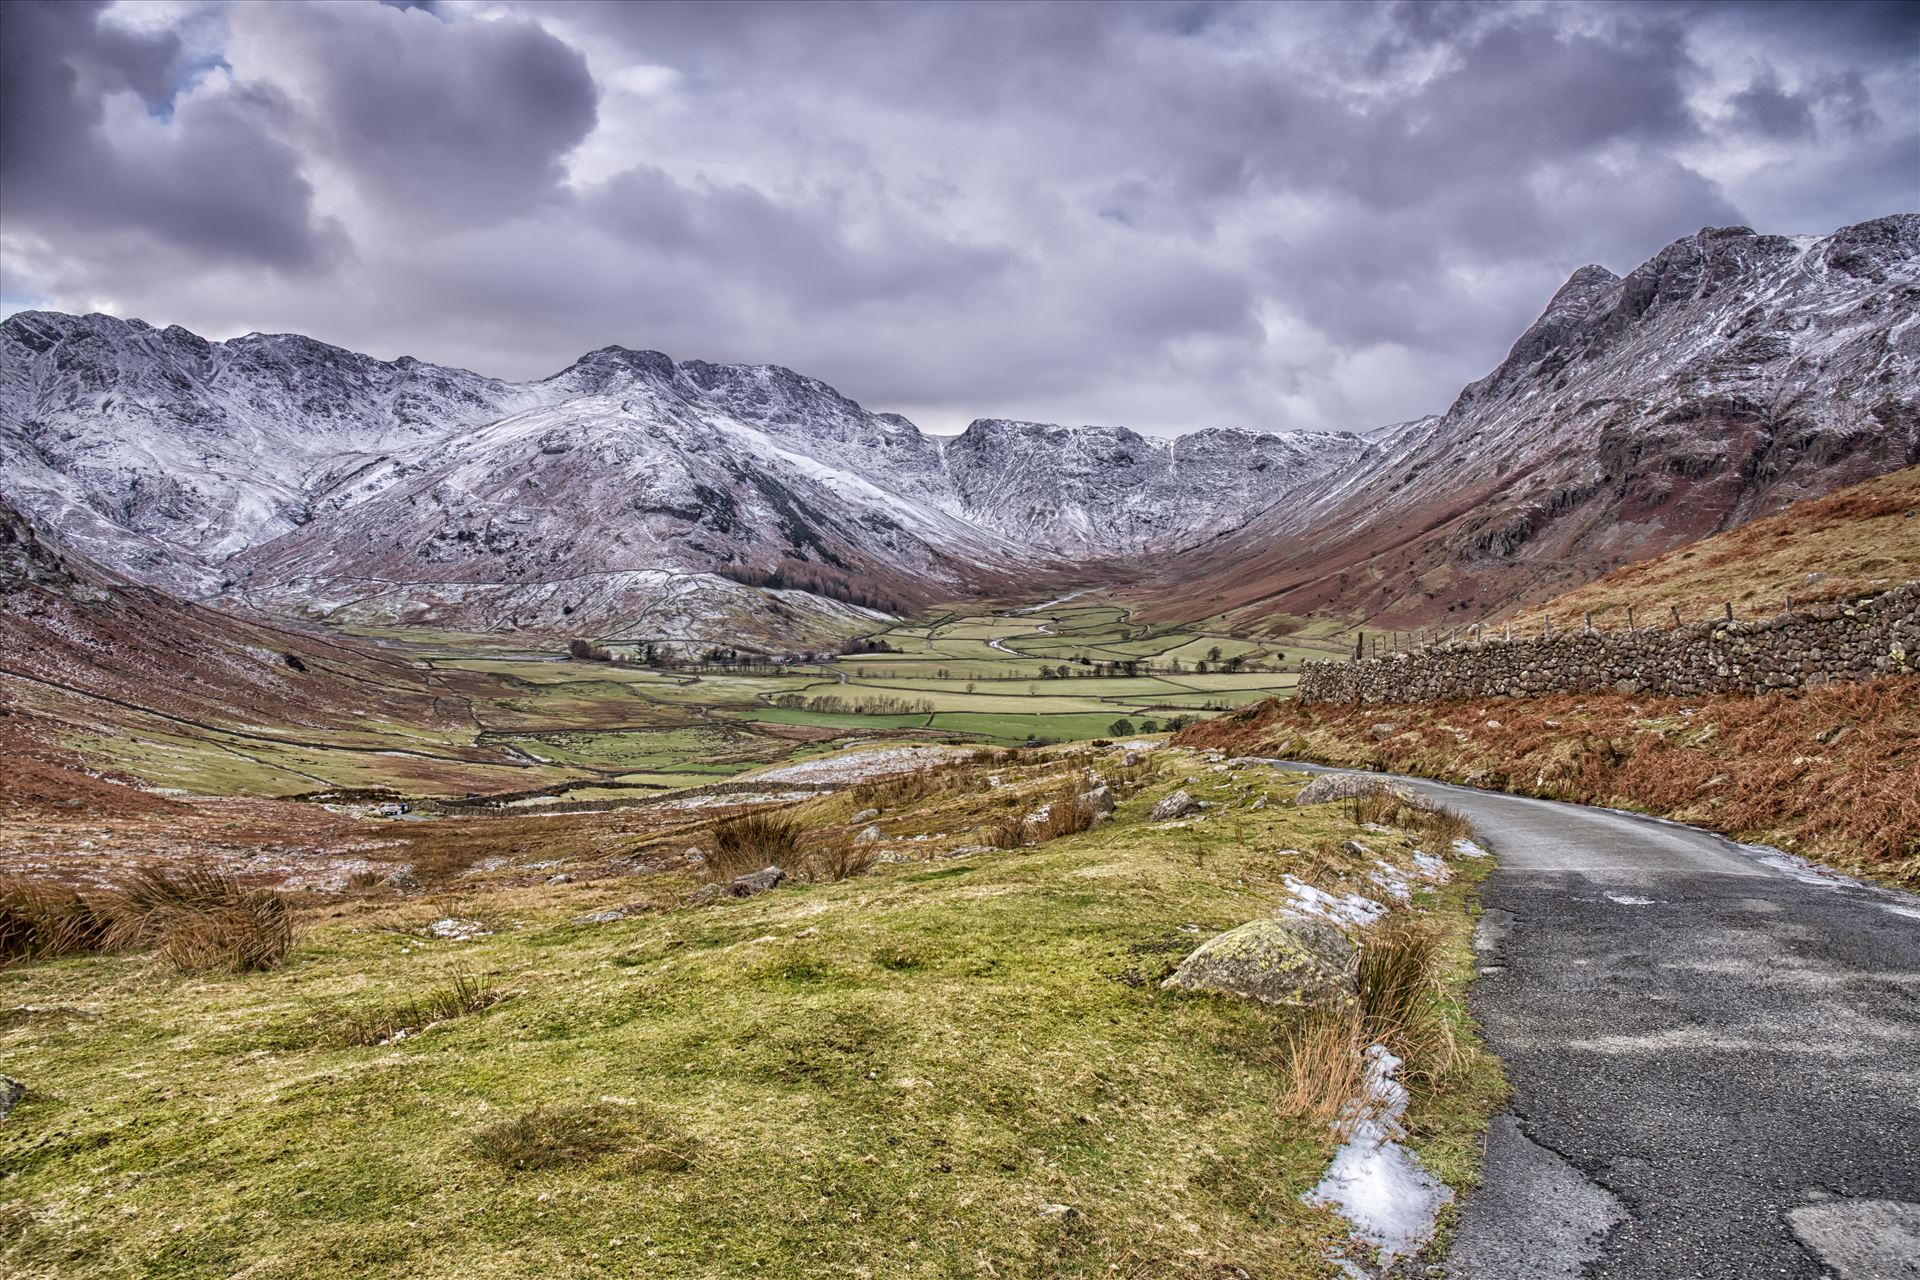 Snowy mountains - A snowy landscape shot taken in the Langdale area of the Lake District. by philreay